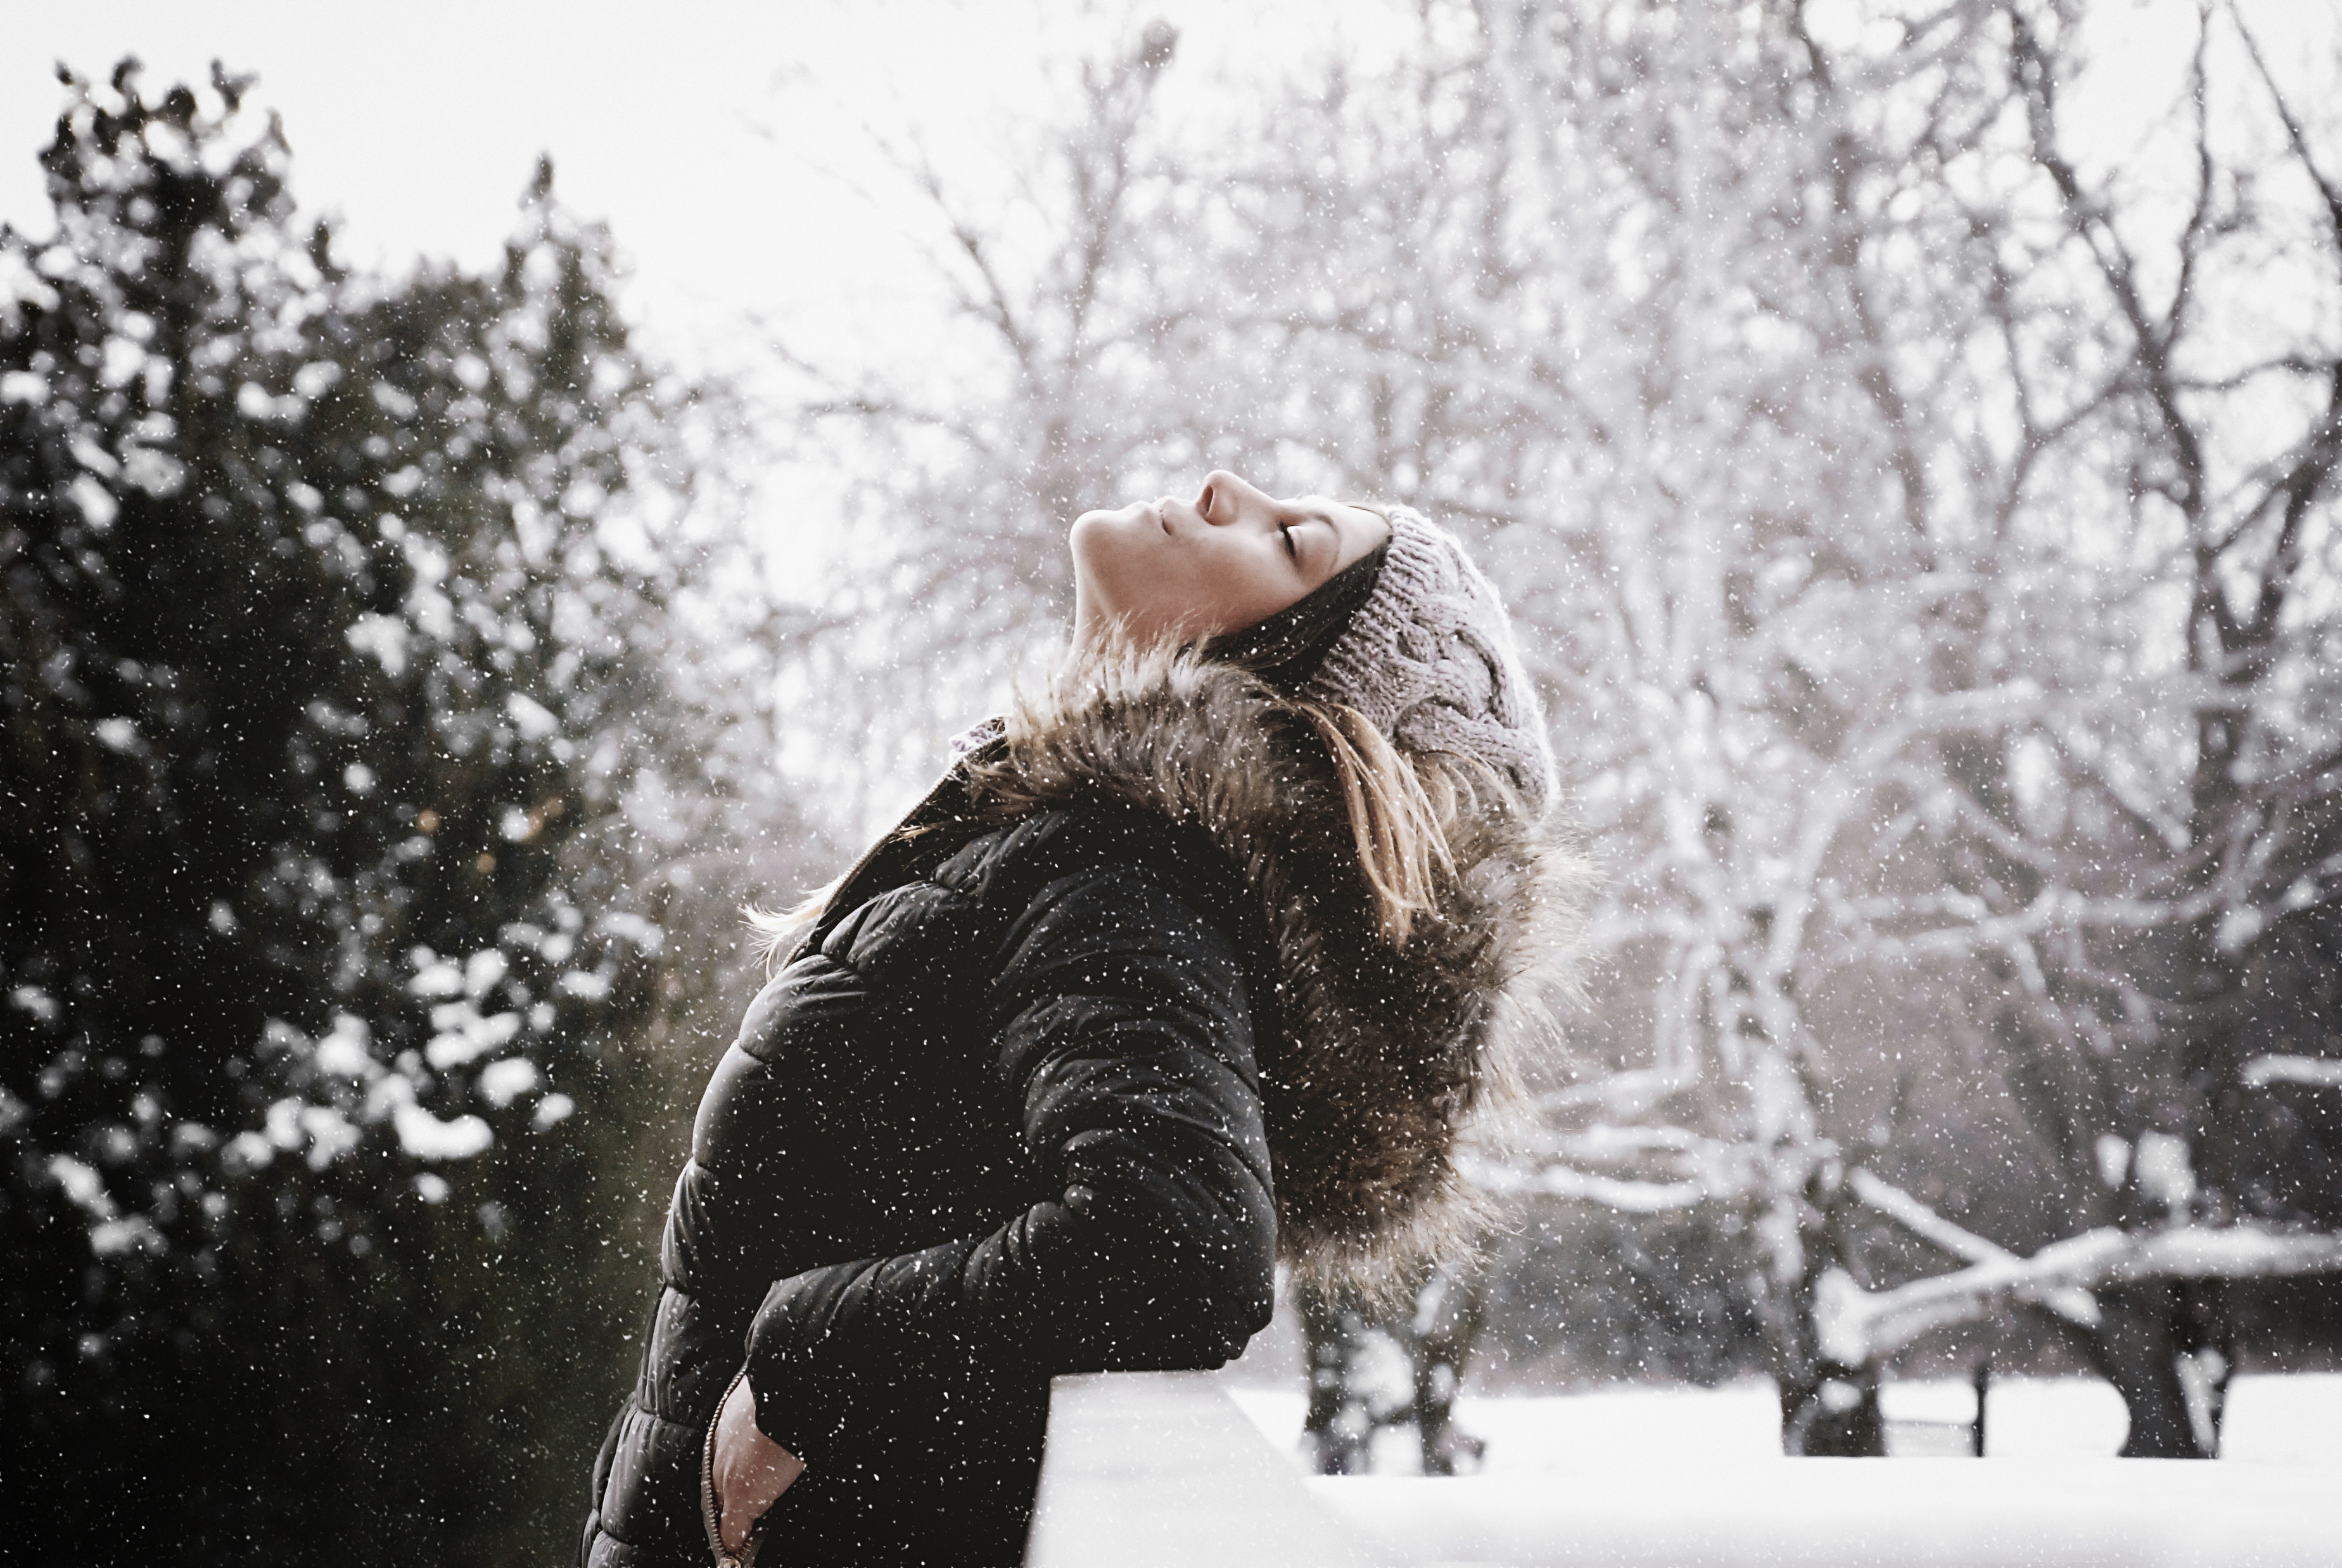 You Got This! 5 Non-Cliché Ways To Manage Negative Emotions During The Holidays 